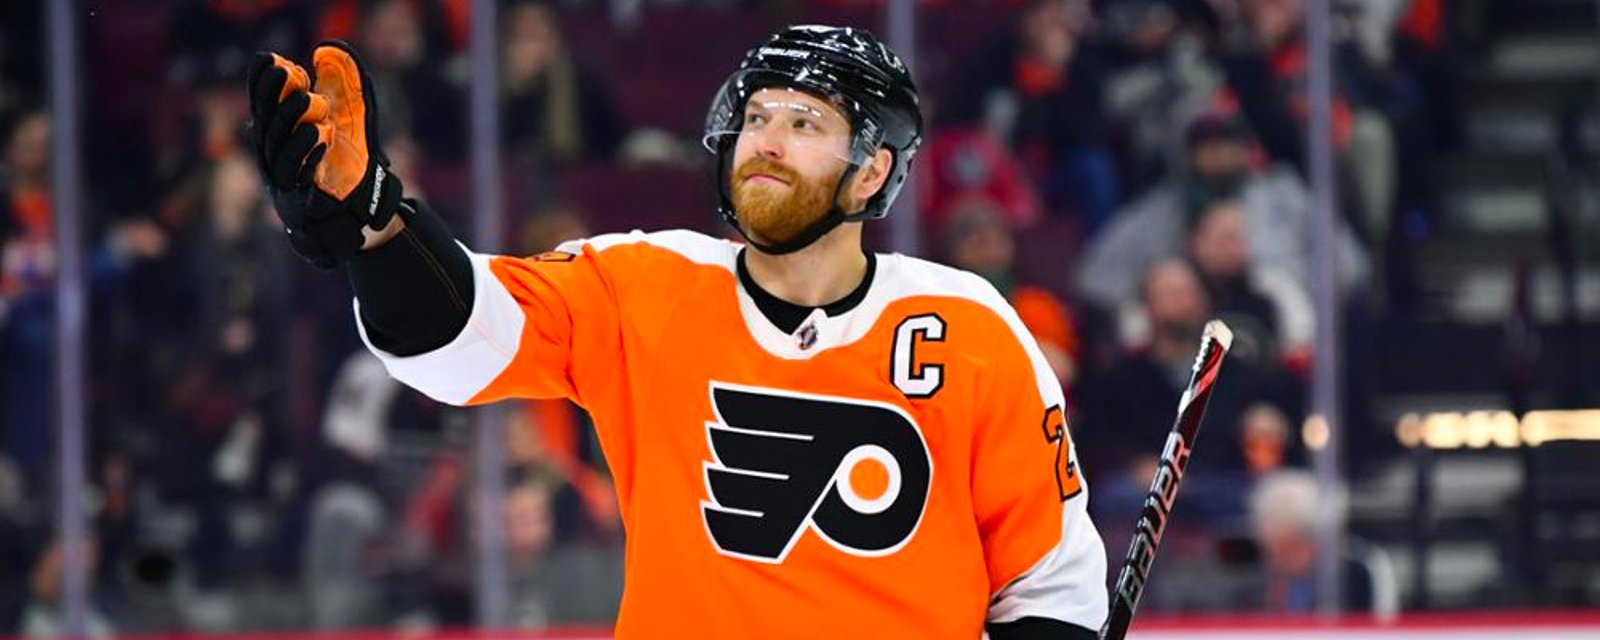 Report: NHL season lies in the hands of players Ian Cole, Zach Hyman, Claude Giroux and Ron Hainsey